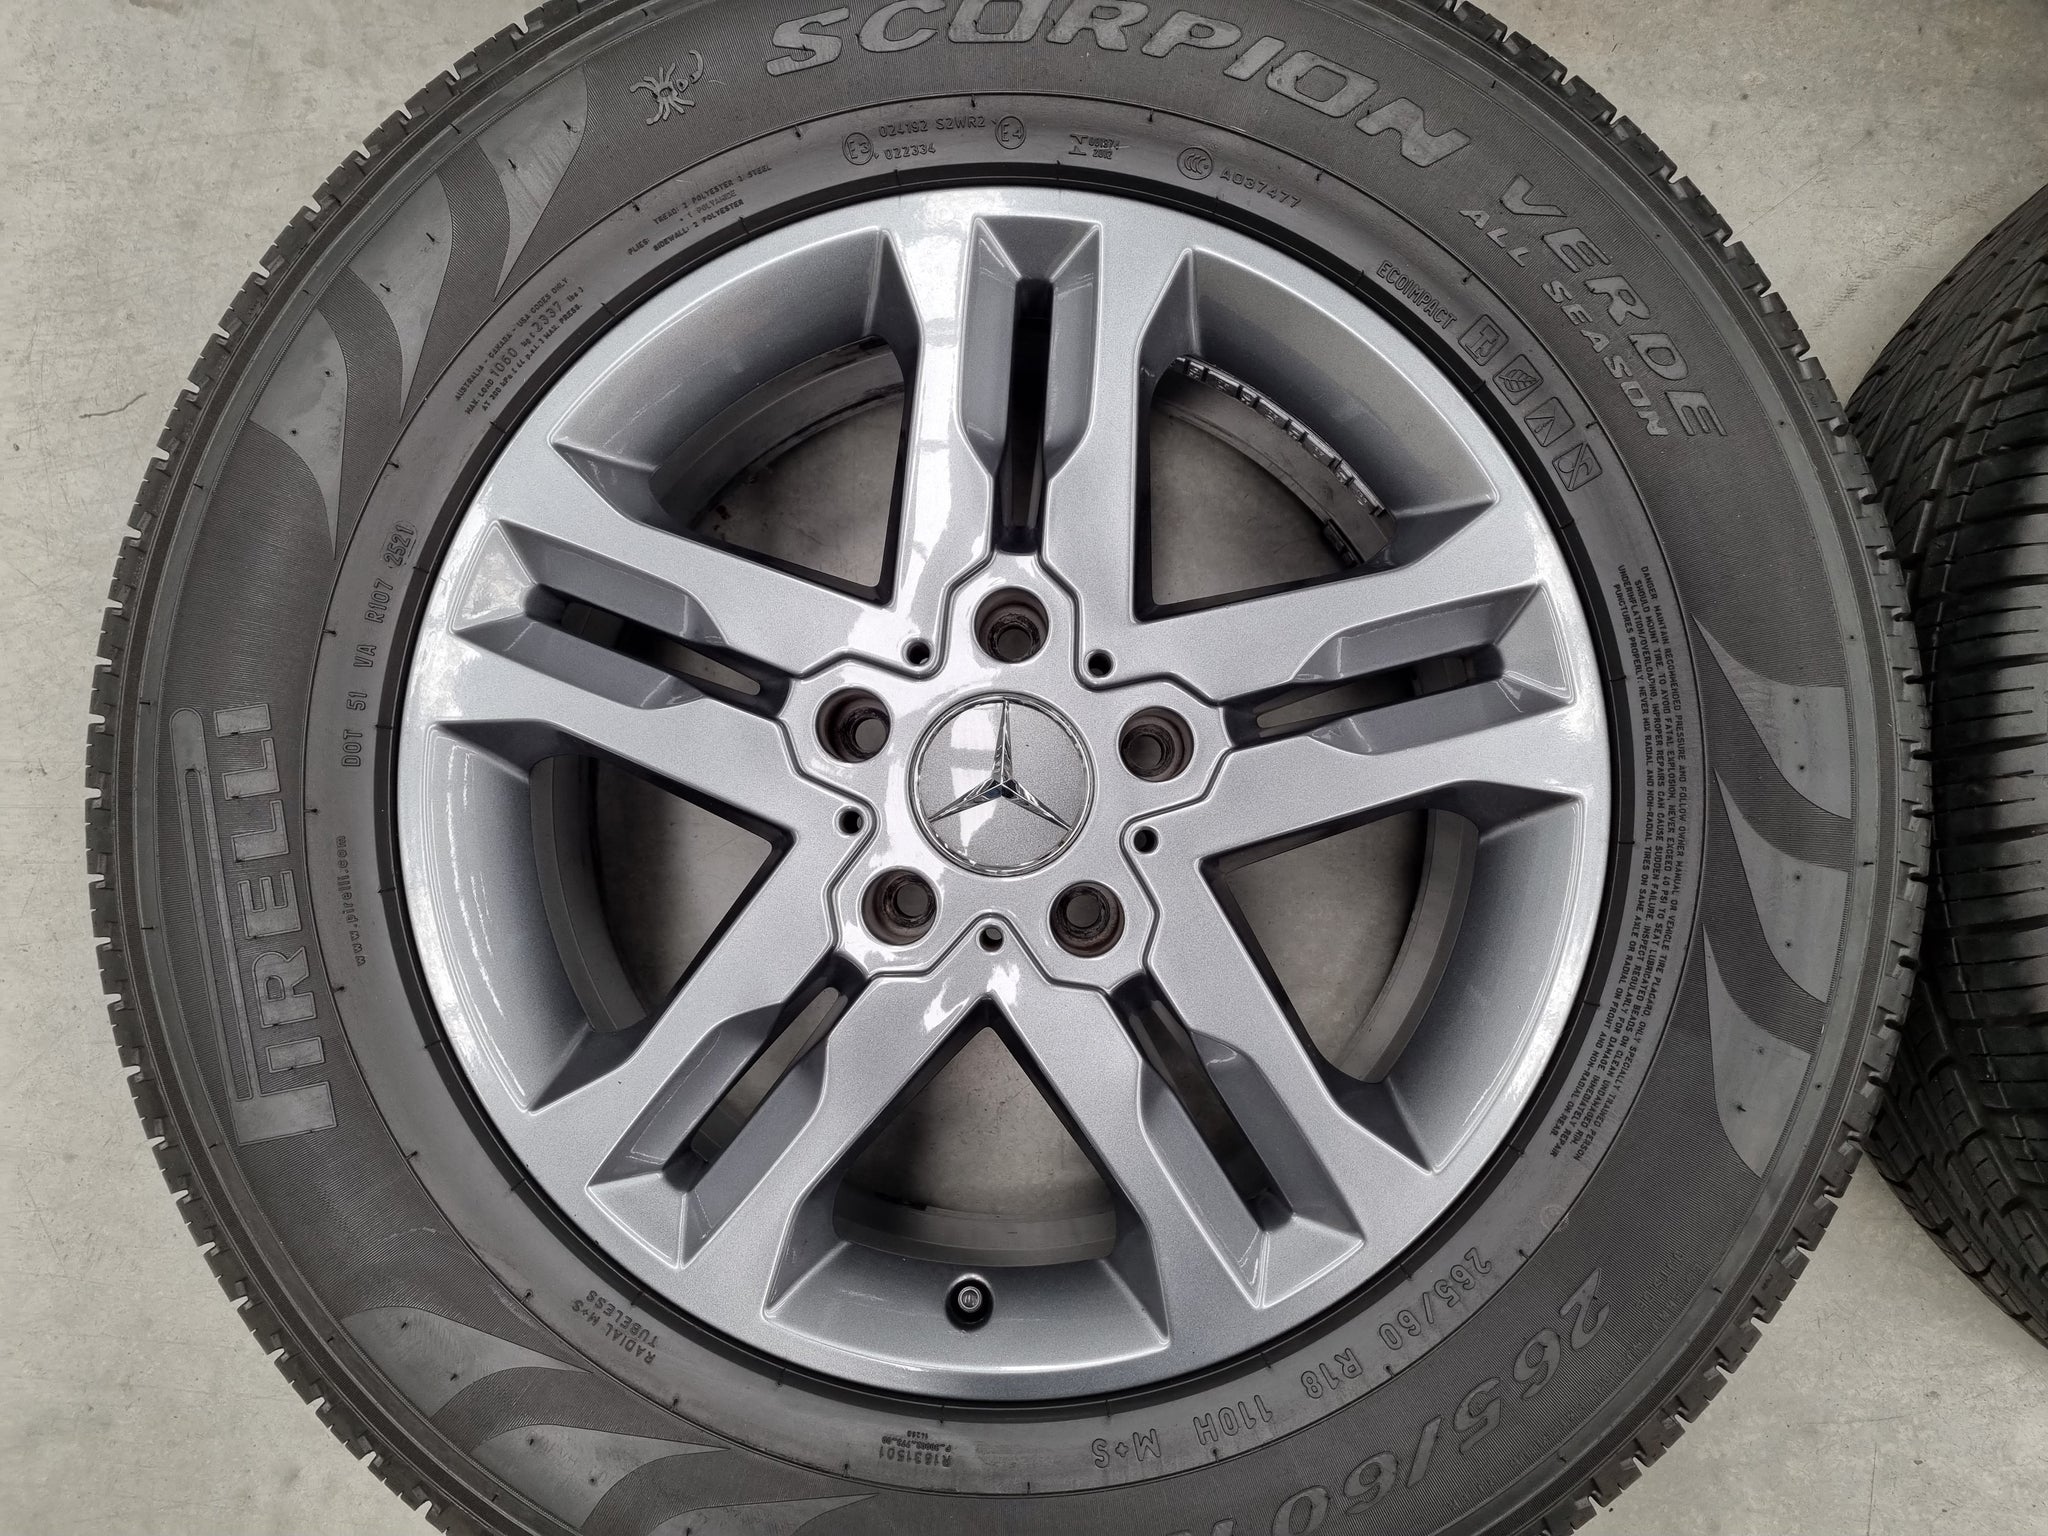 Load image into Gallery viewer, Genuine Mercedes Benz G350 18 Inch Wheels and Tyres Set of 4
